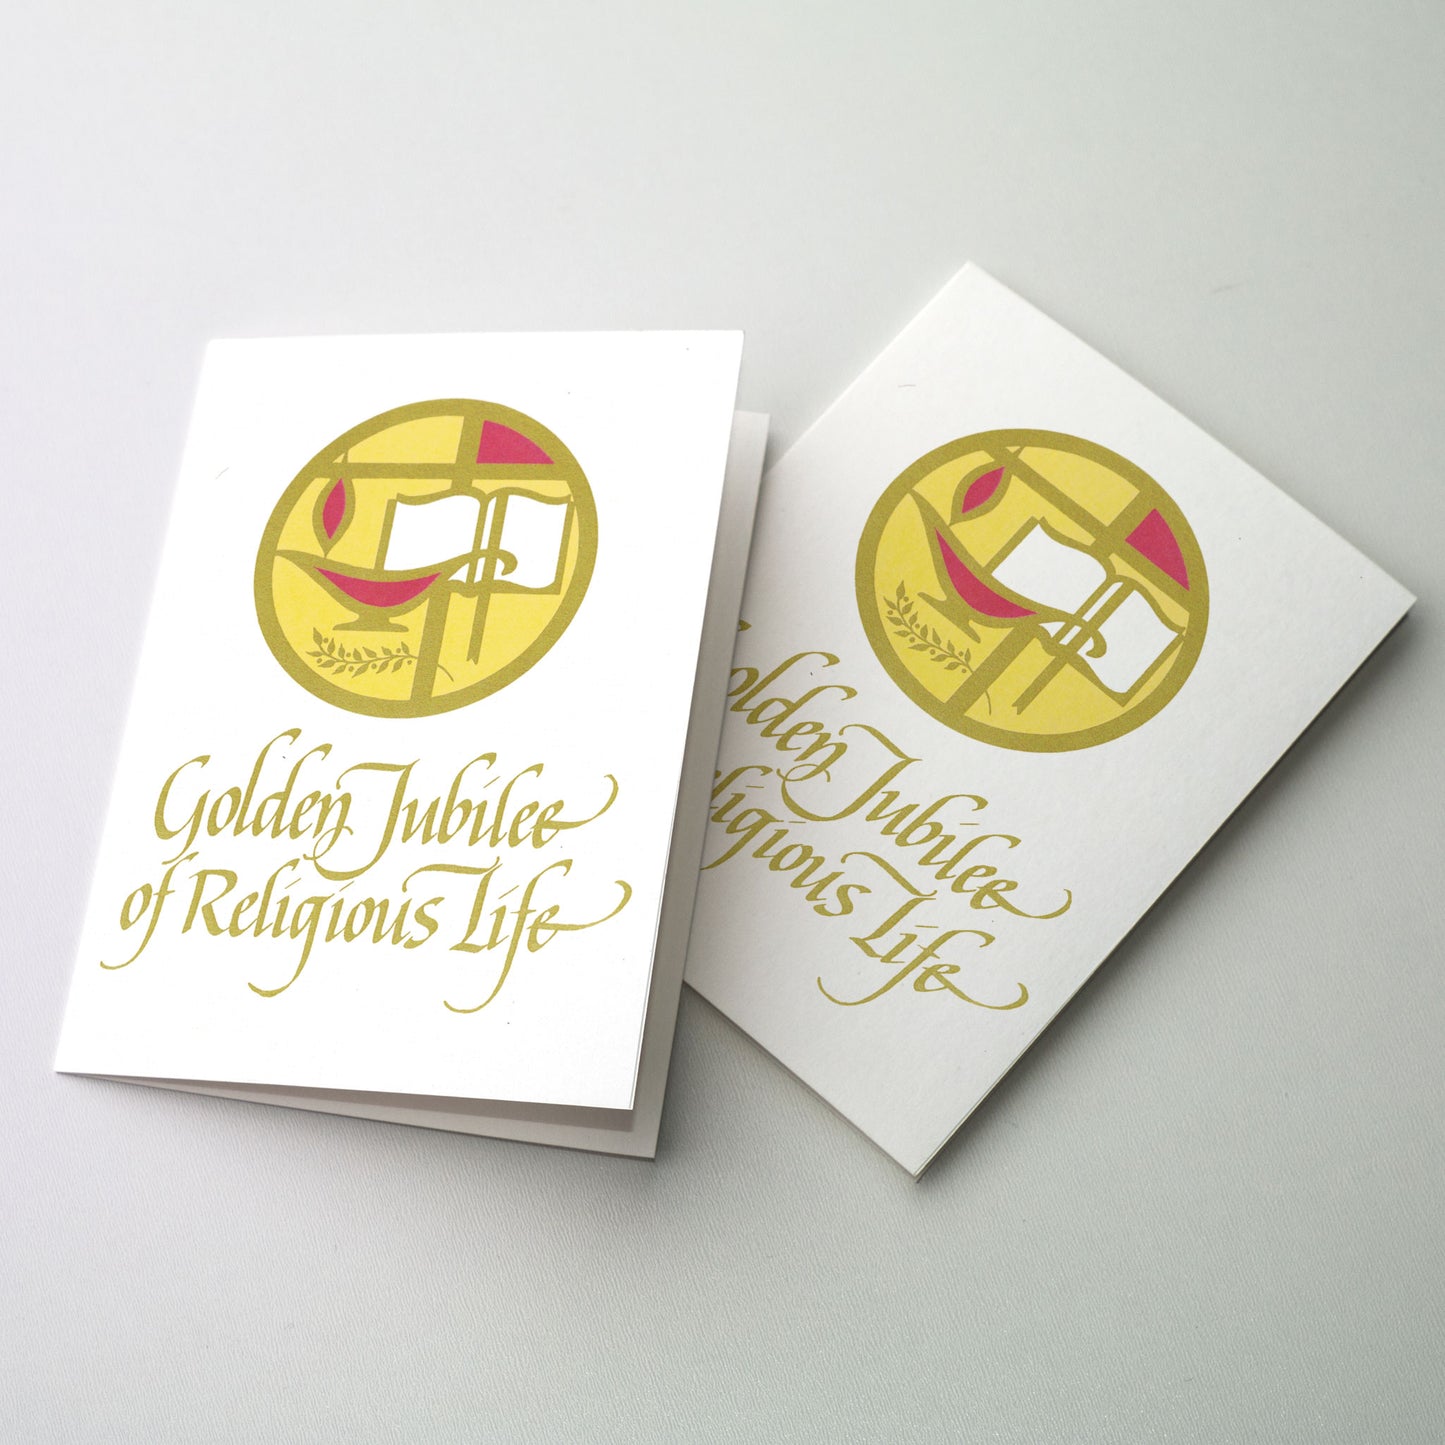 Golden Jubilee of Religious Life - 50th Religious Profession Anniversary Card